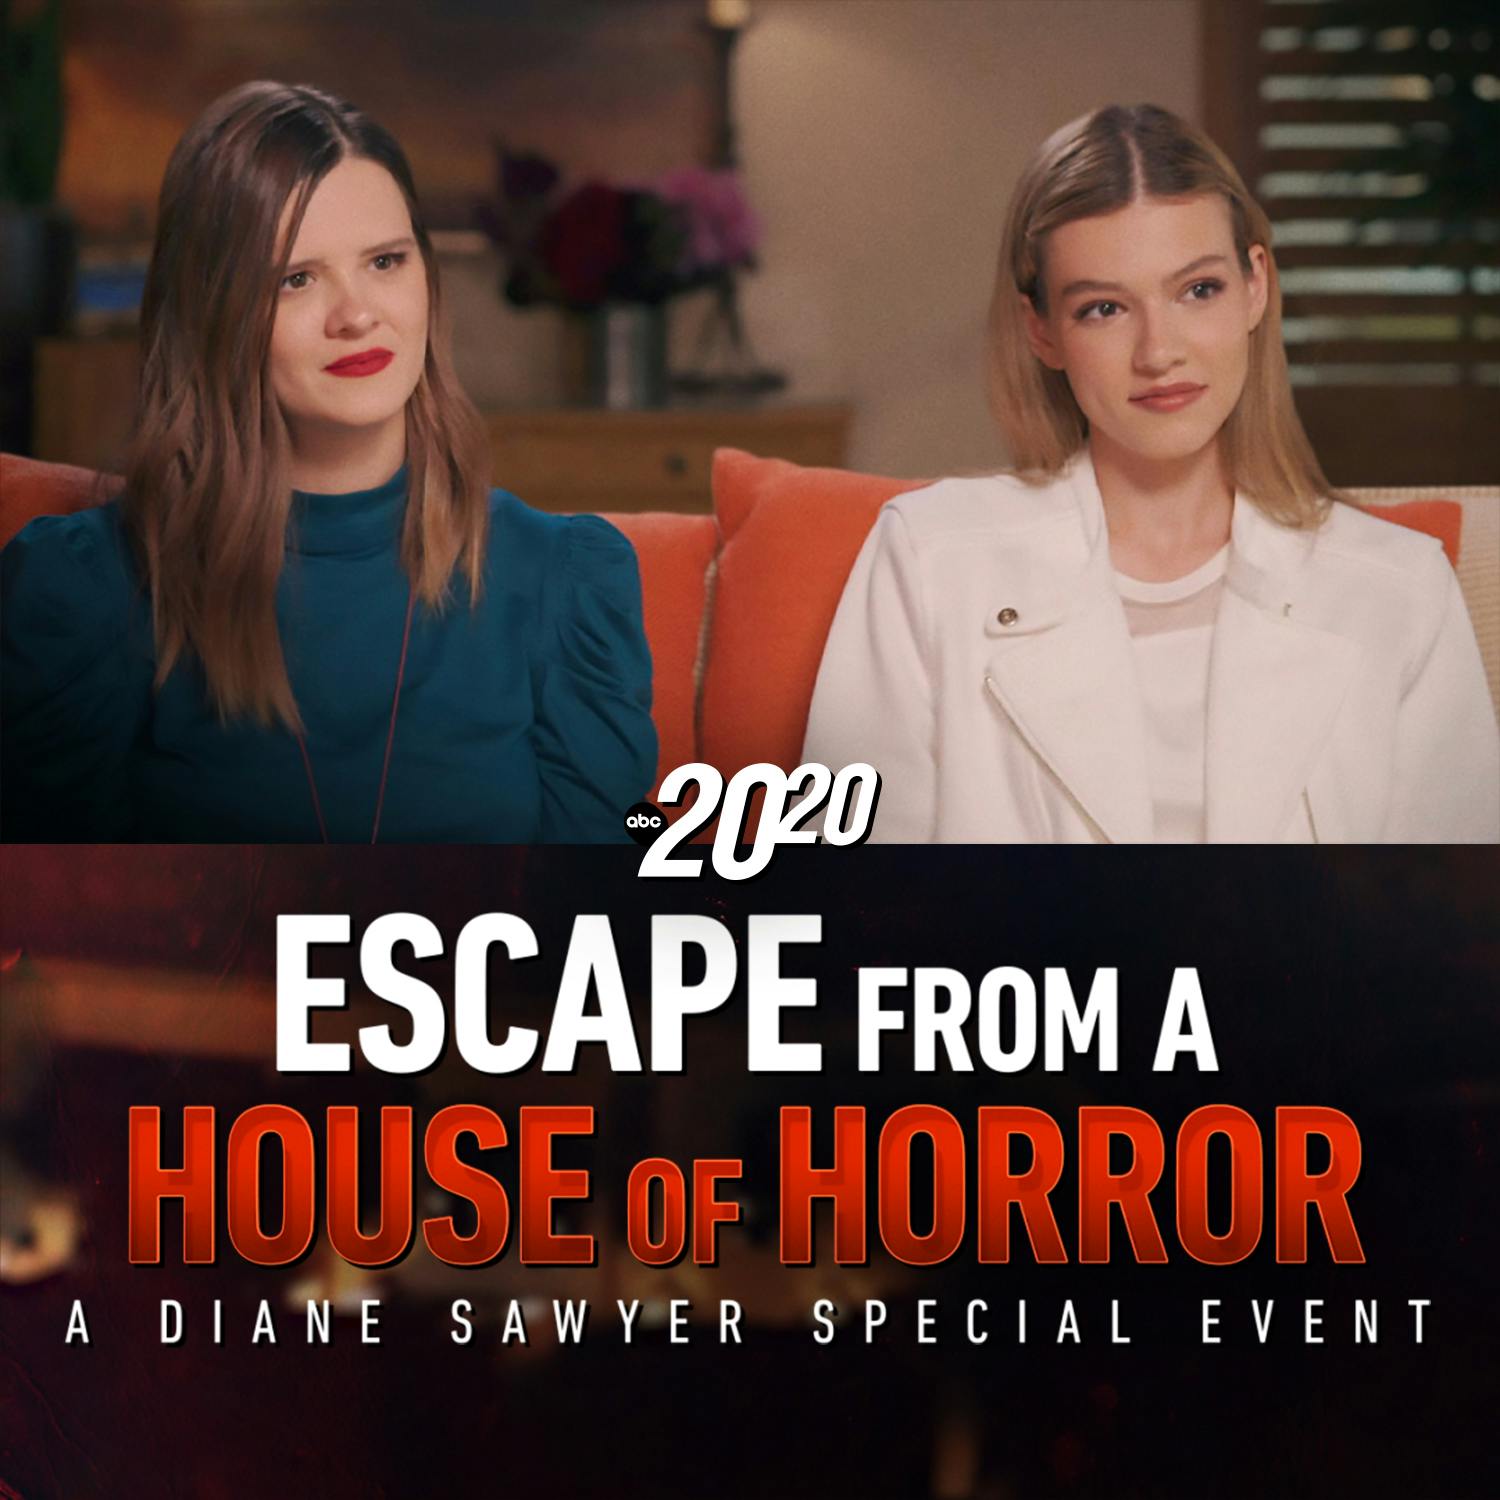 "Escape from a House of Horror" - A Diane Sawyer Special Event